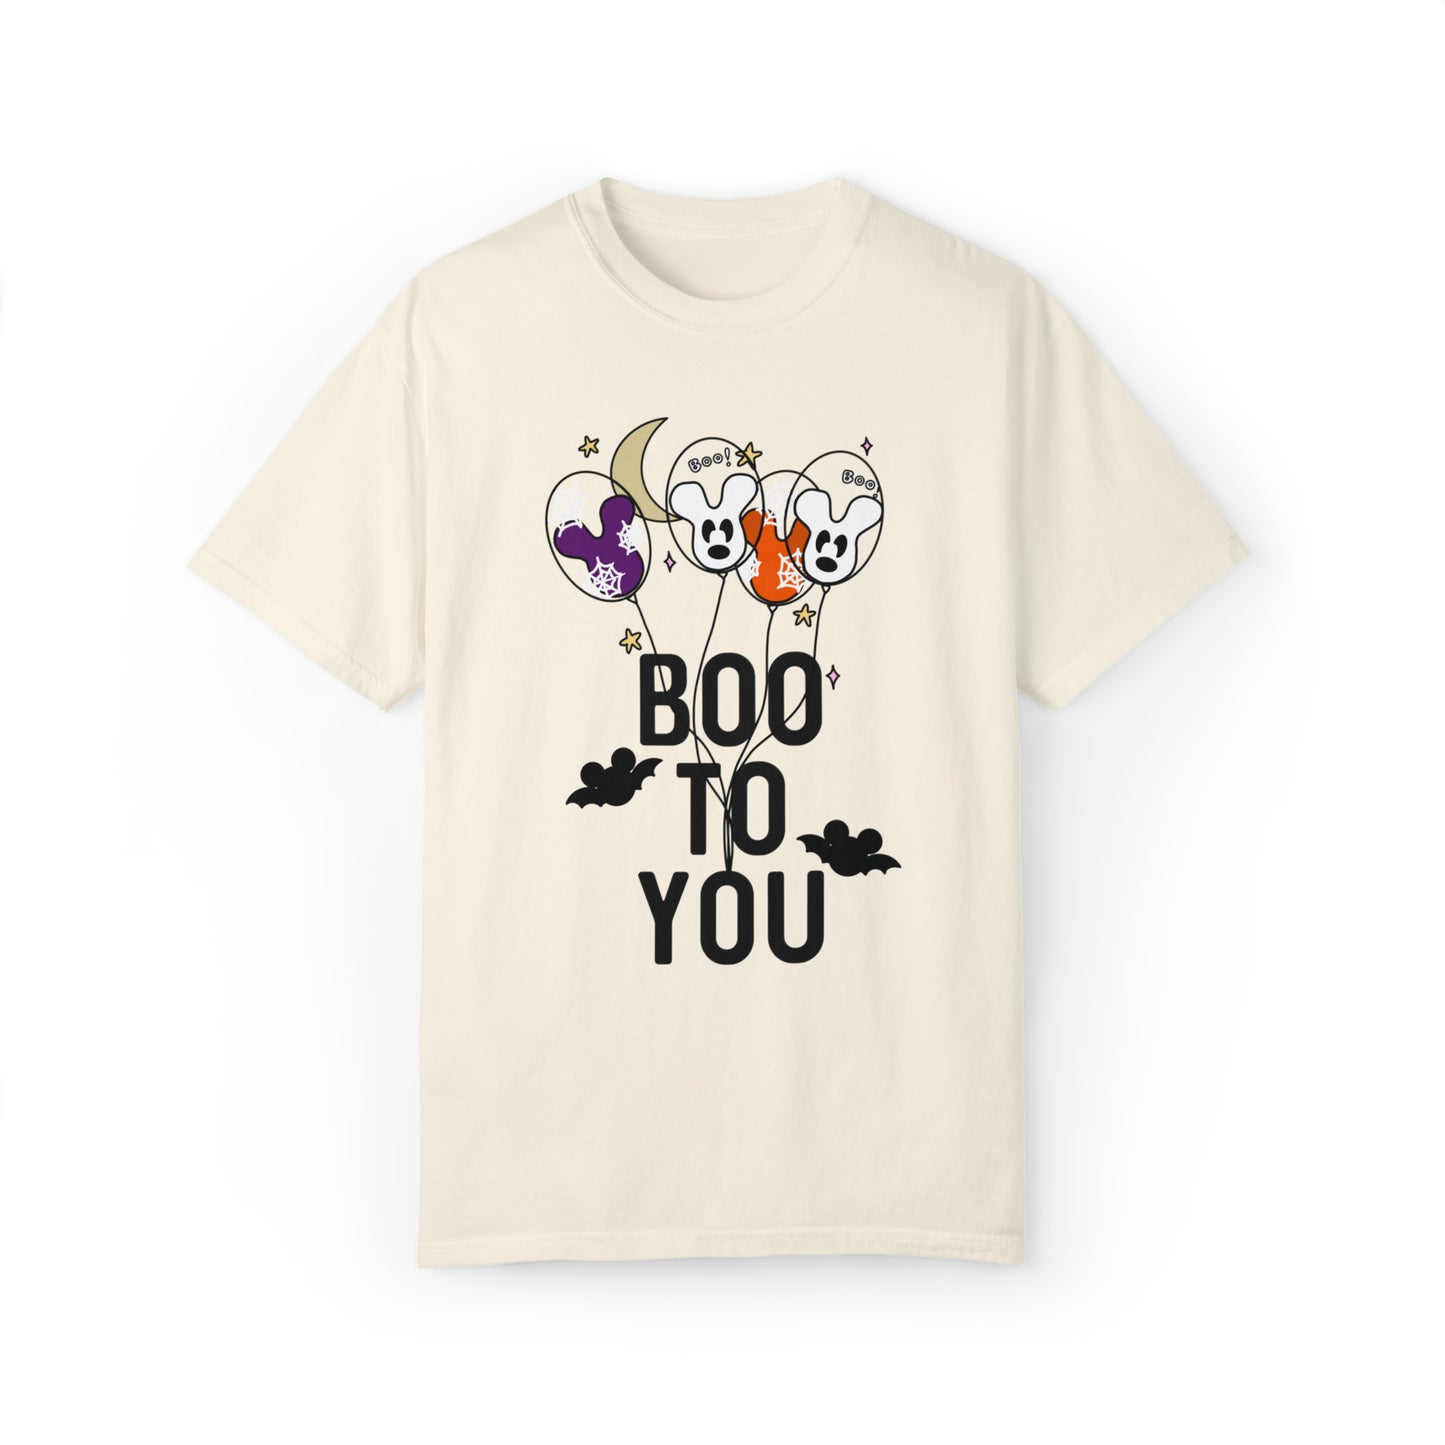 Adult Boo to you Tee - Comfort Colors